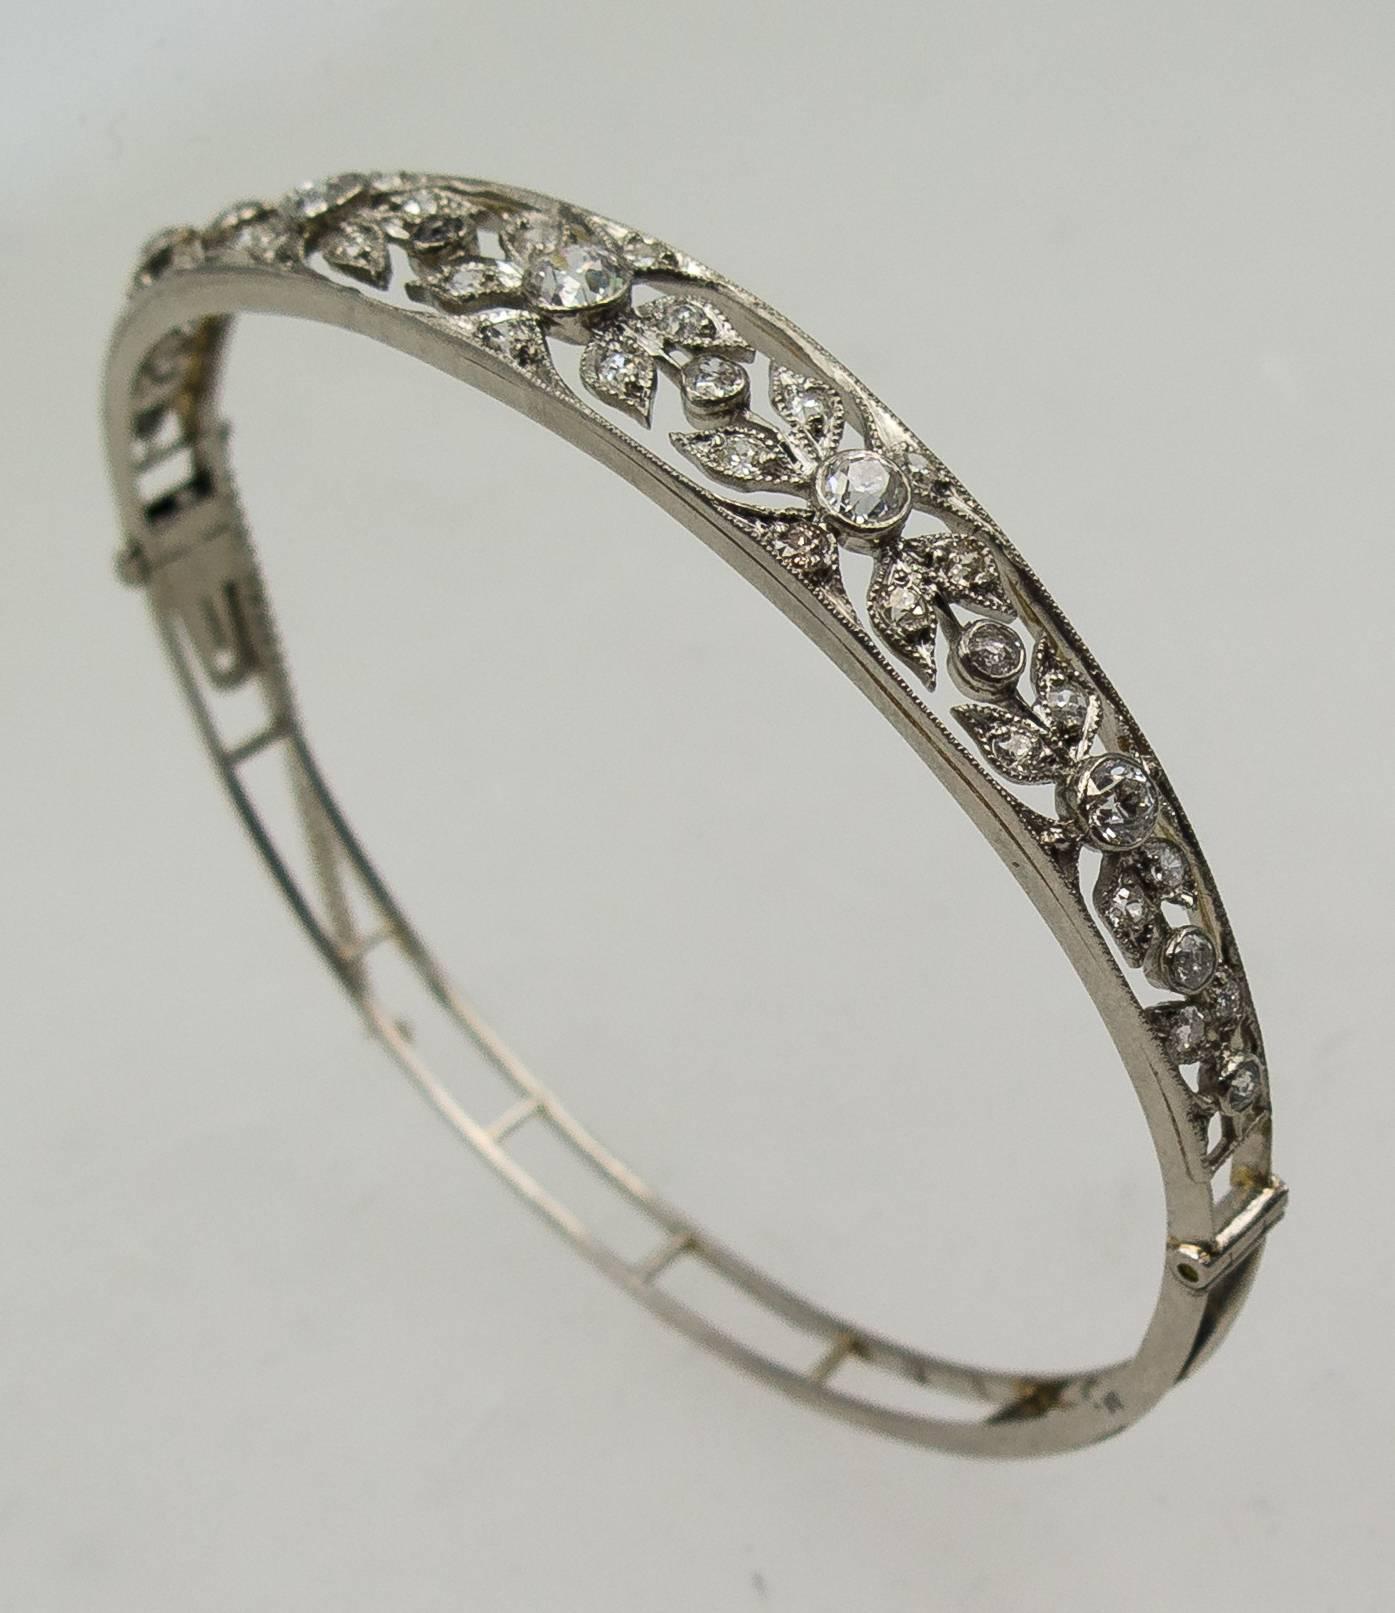   Beautiful and feminine half round bangle bracelet set with older cut diamonds  in an ornate floral filigree motif that spreads halfway around the bracelet.  There's a total of about 2 1/3 carats of diamonds in the jewel, and it will fit the